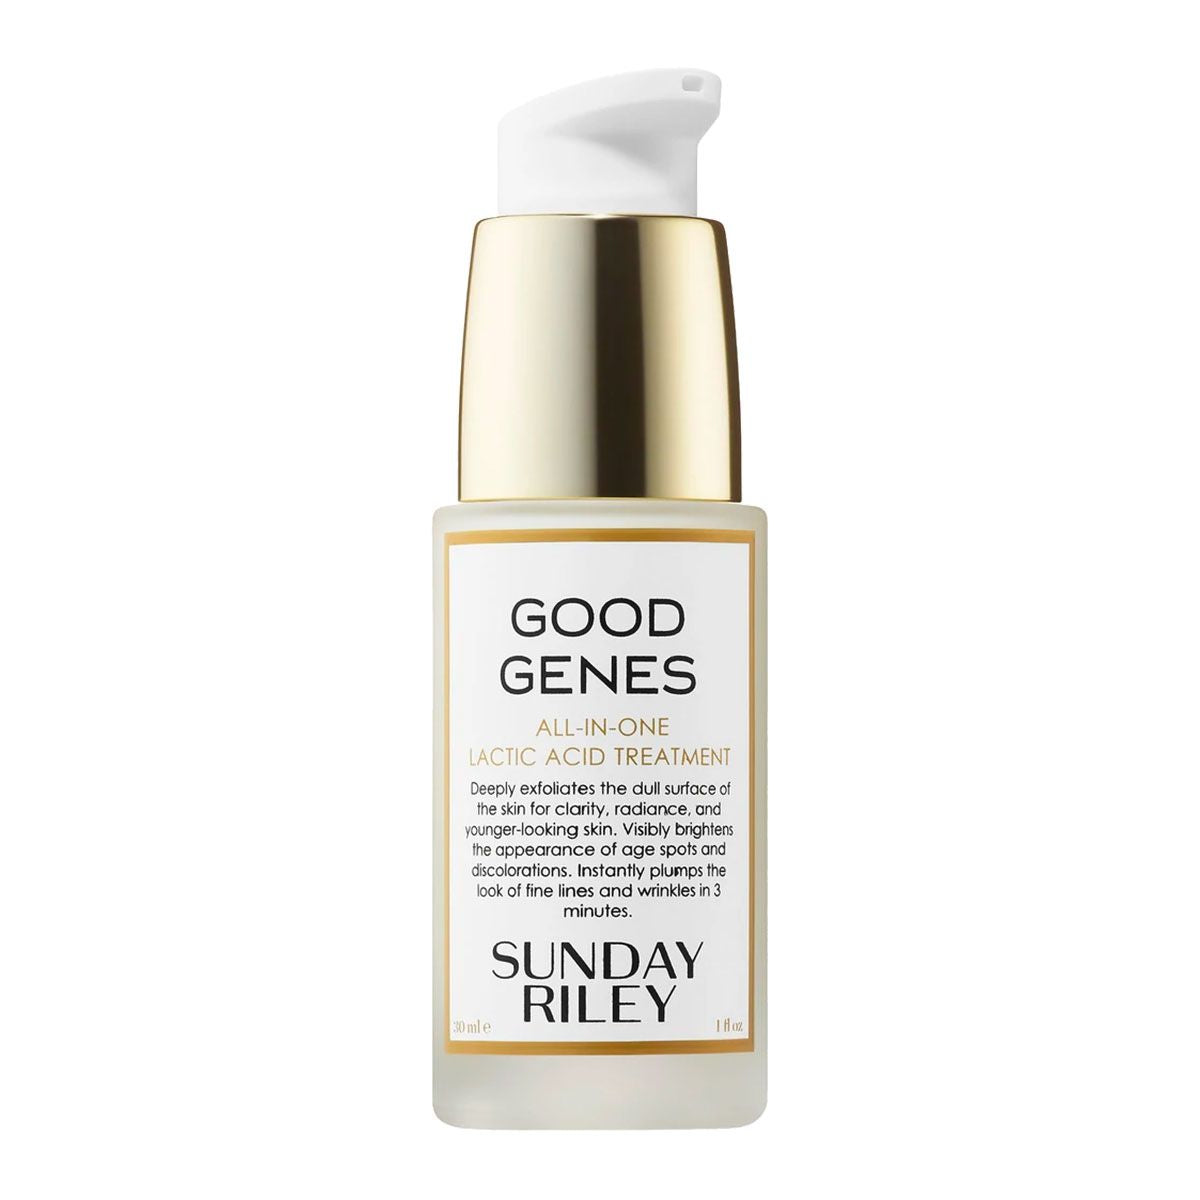 Sunday Riley Good Genes All-In-One Lactic Acid Treatment 30 ml